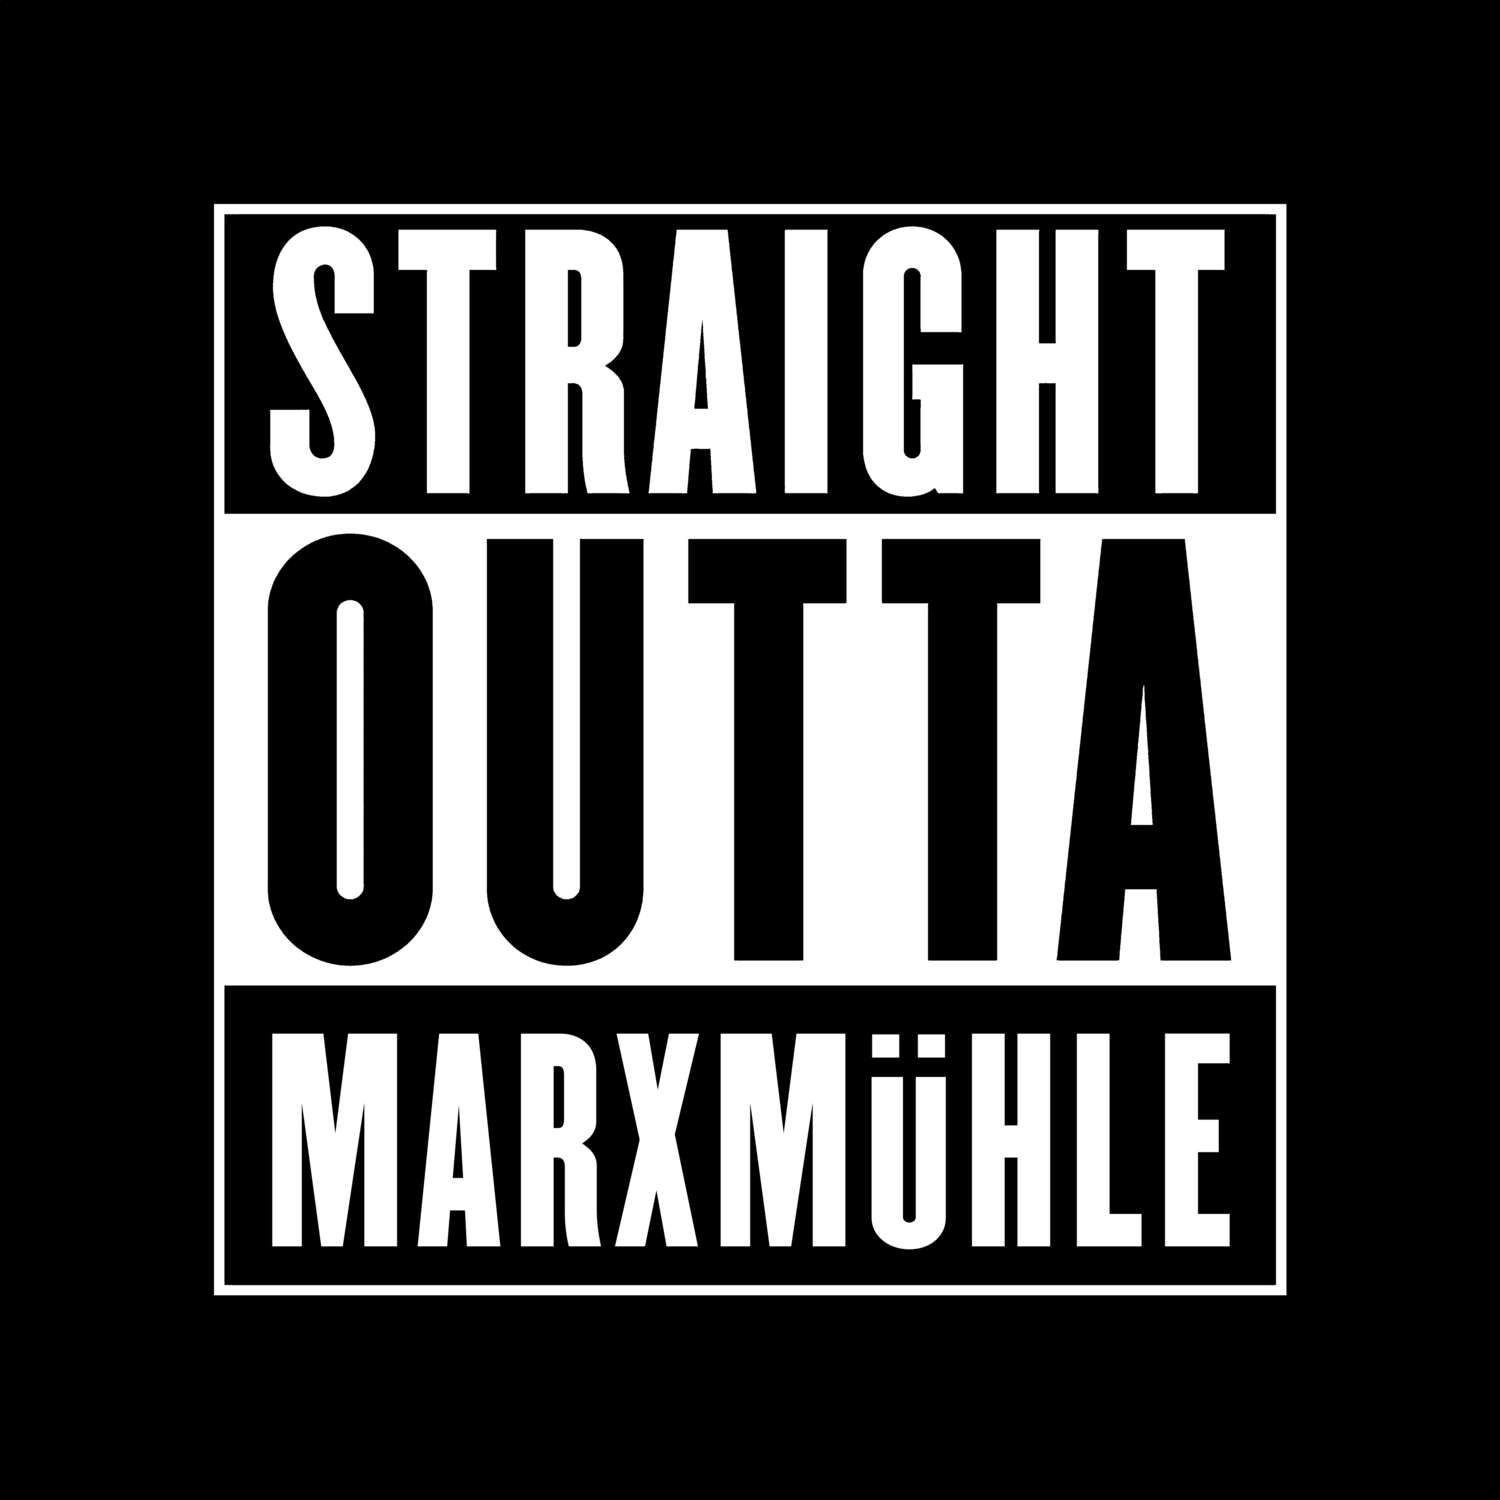 Marxmühle T-Shirt »Straight Outta«